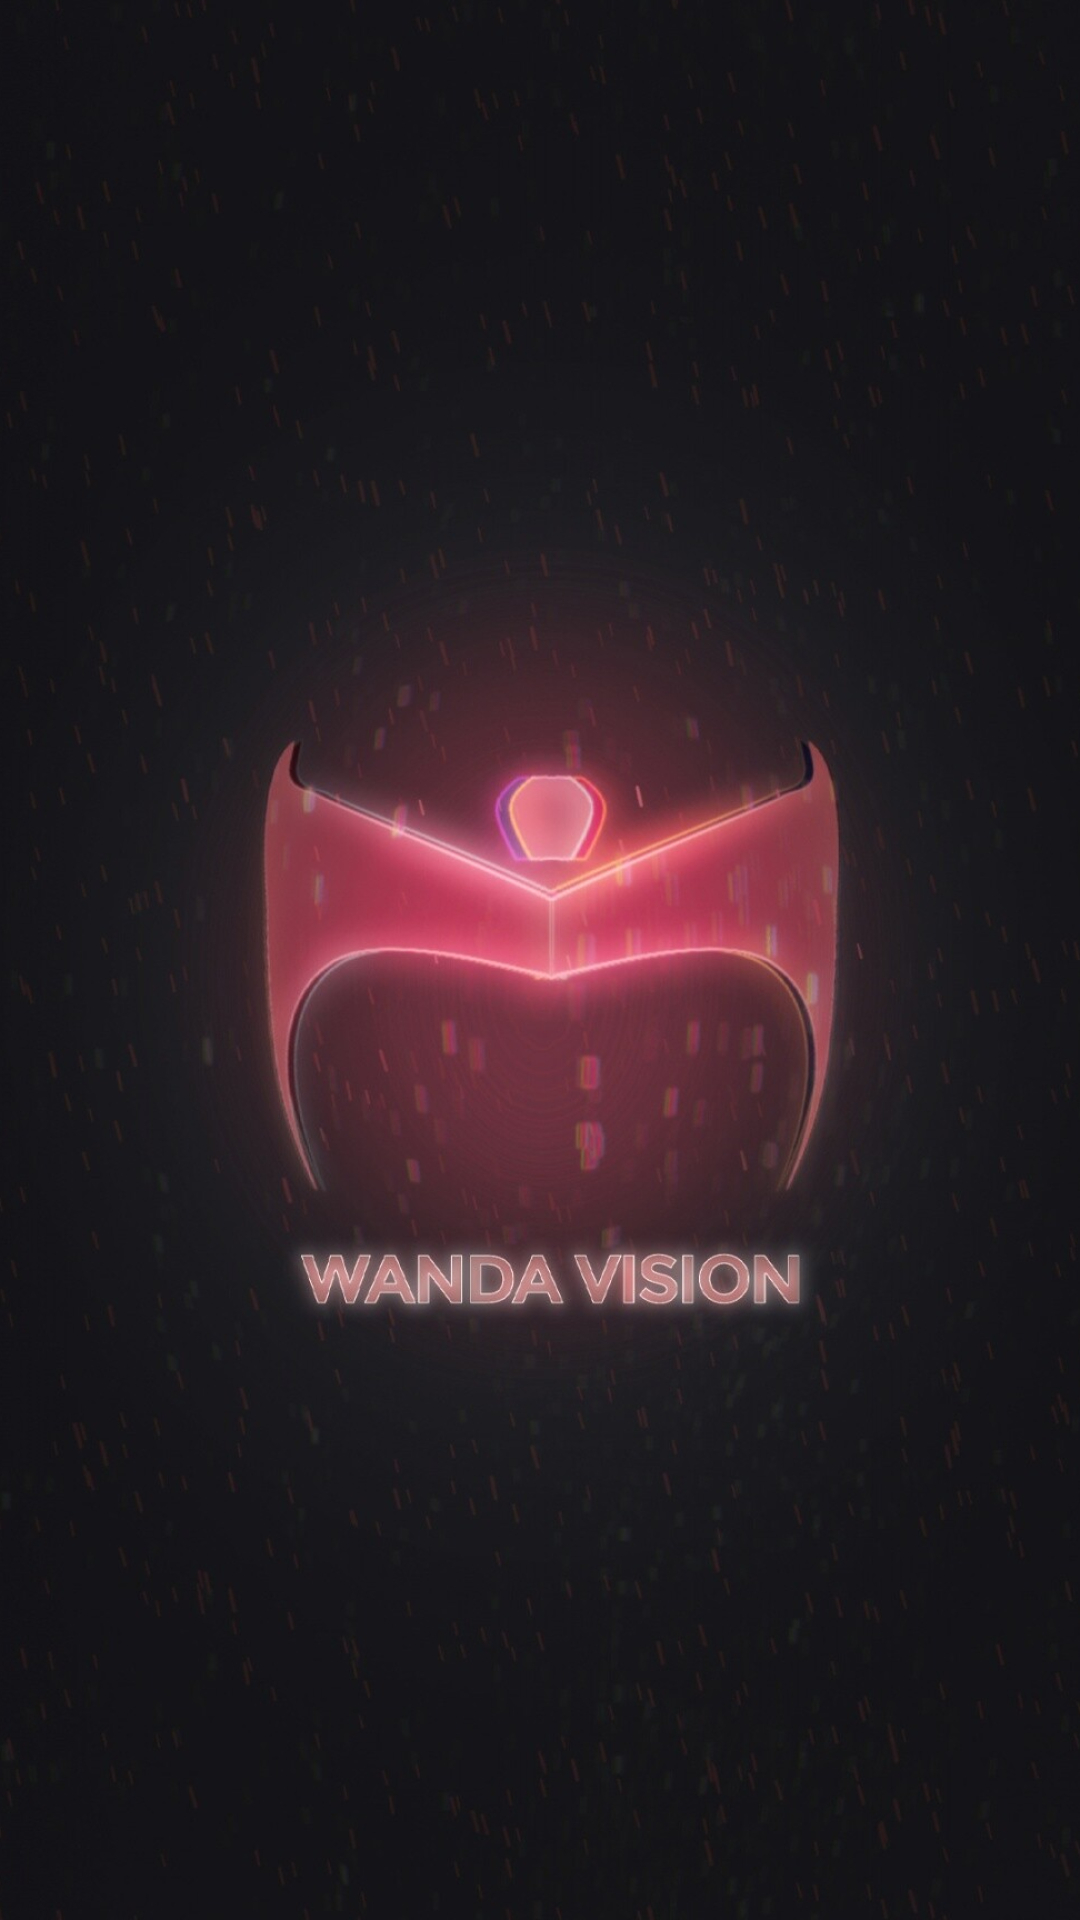 WandaVision: The first and only season premiered on January 15, 2021, and concluded on March 5, 2021. 1080x1920 Full HD Wallpaper.